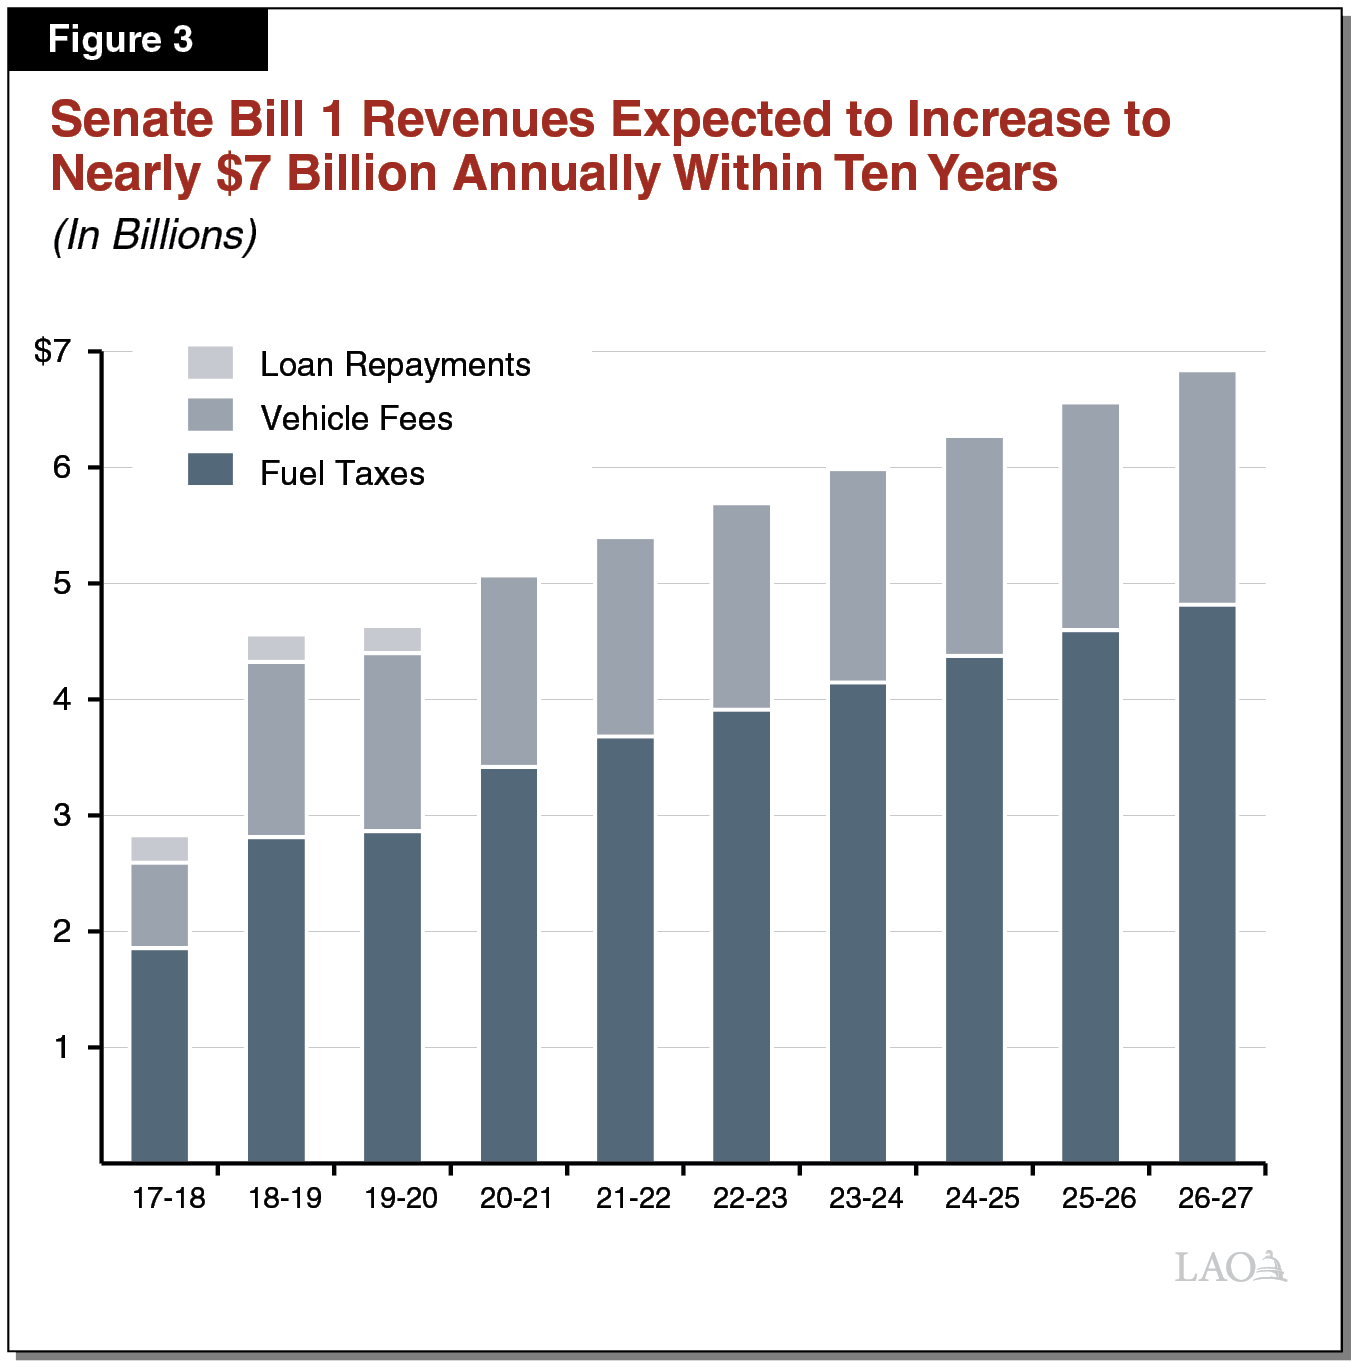 Figure 3 - Senate Bill 1 Revenues Expected to Increase to Nearly 7 Billion Annually Within Ten Years